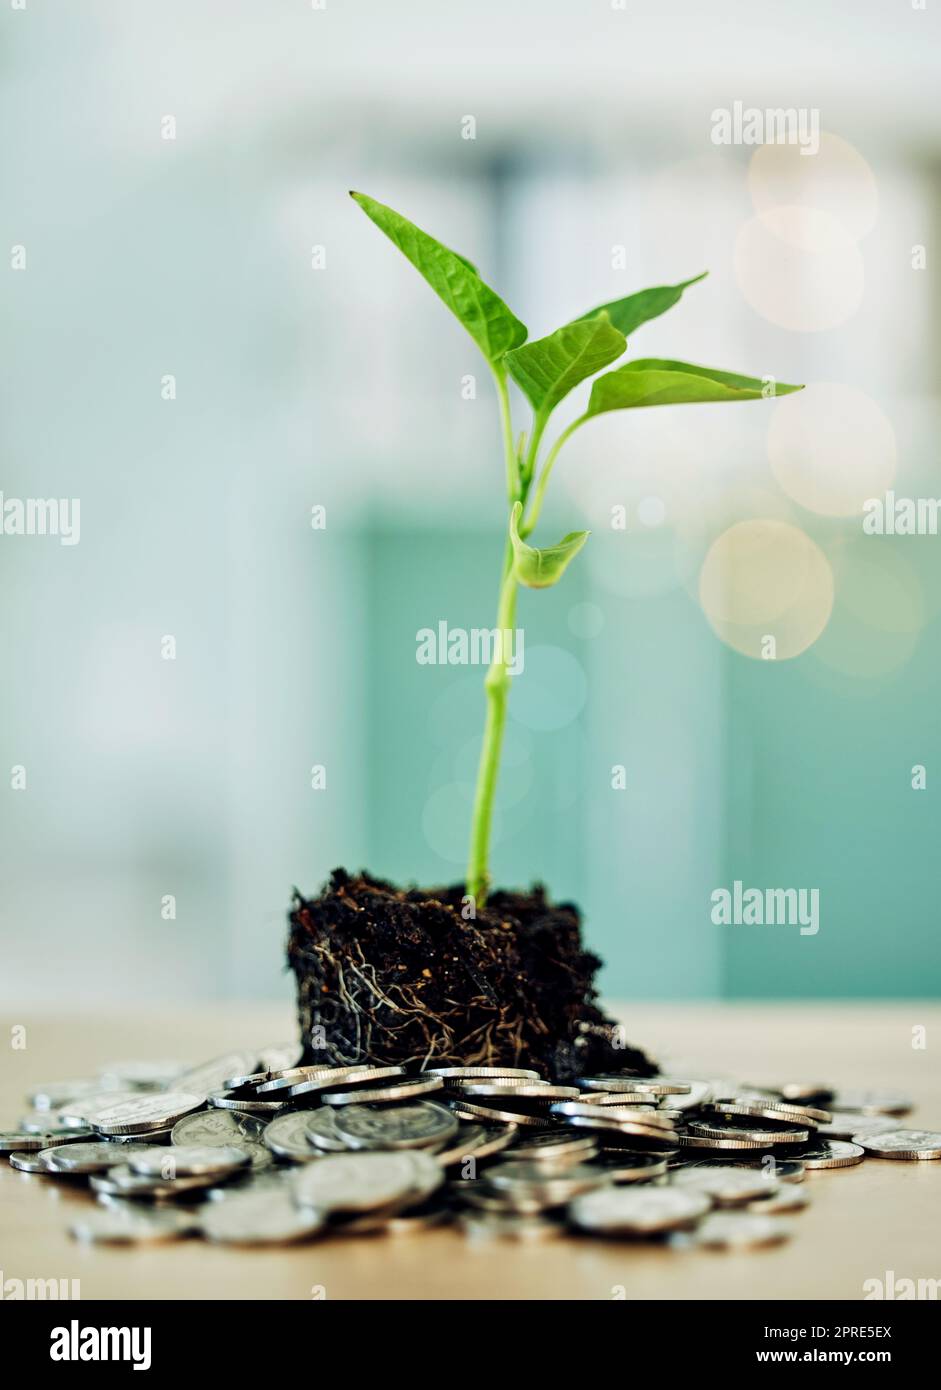 Investment and development in environment benefit eco friendly market and businesses. Coins and green plant show money growth, financial sustainability and future savings in finance sector or economy Stock Photo